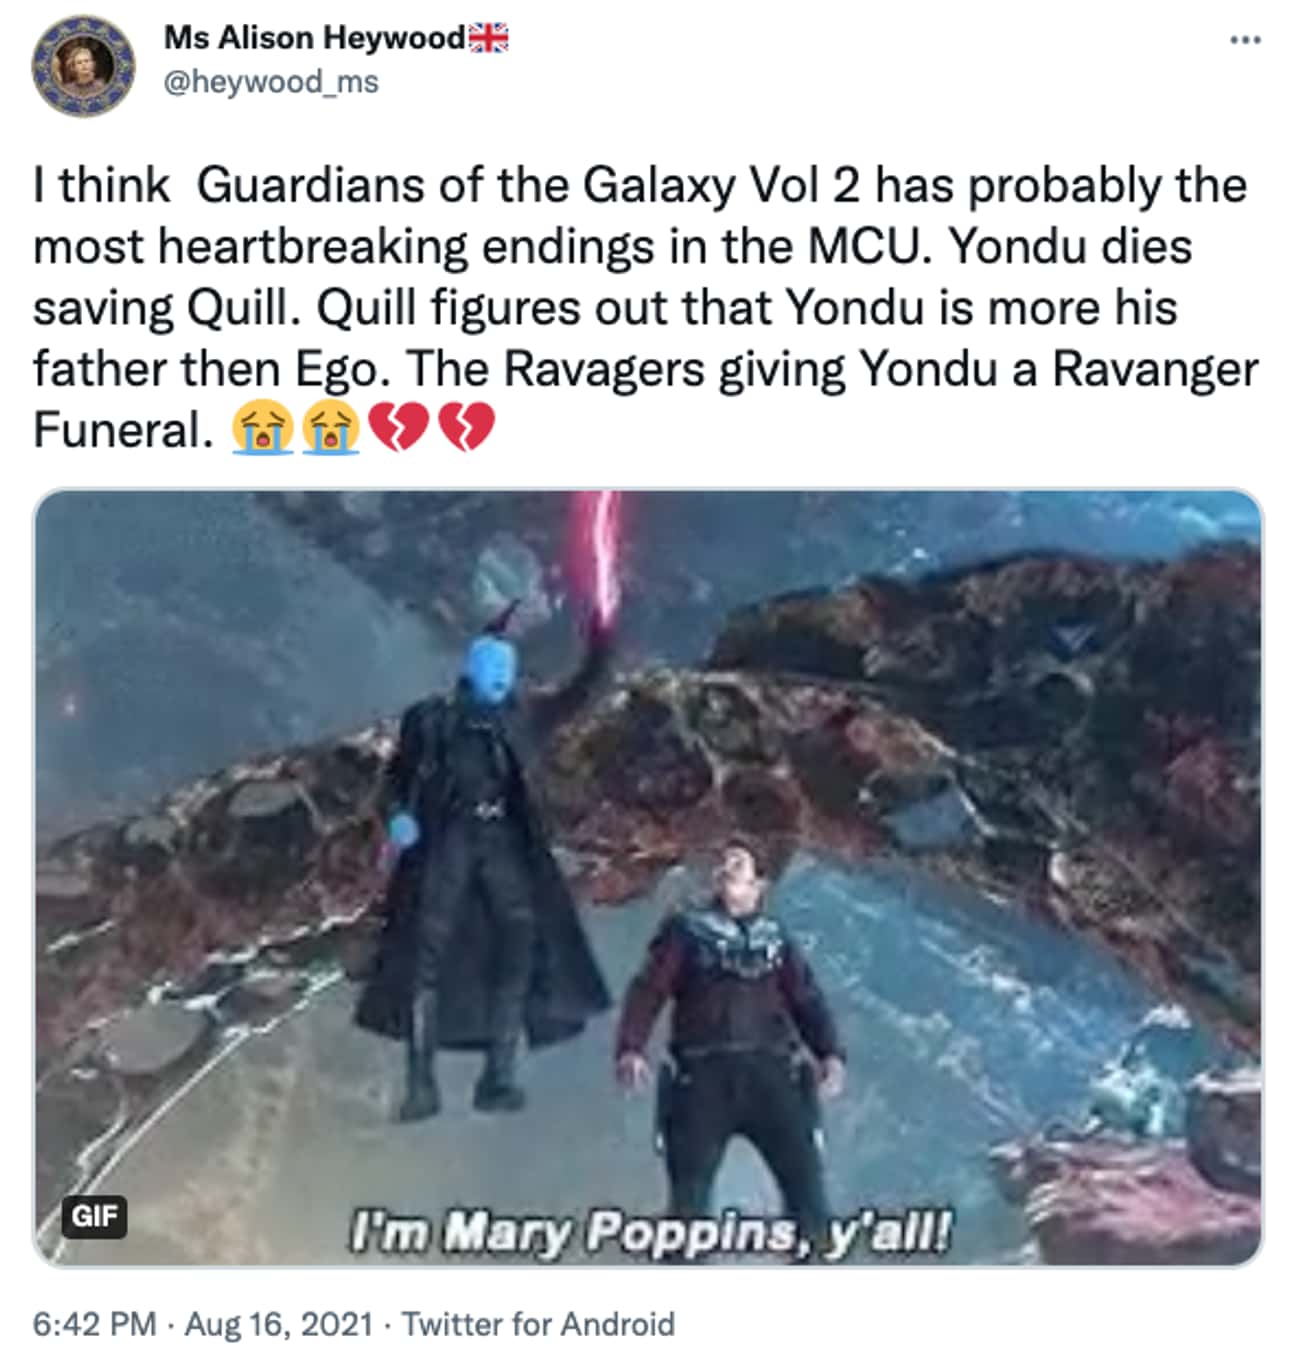 Giving Yondu A Ravanger Funeral Is Heartwarming And Heartbreaking At The Same Time 